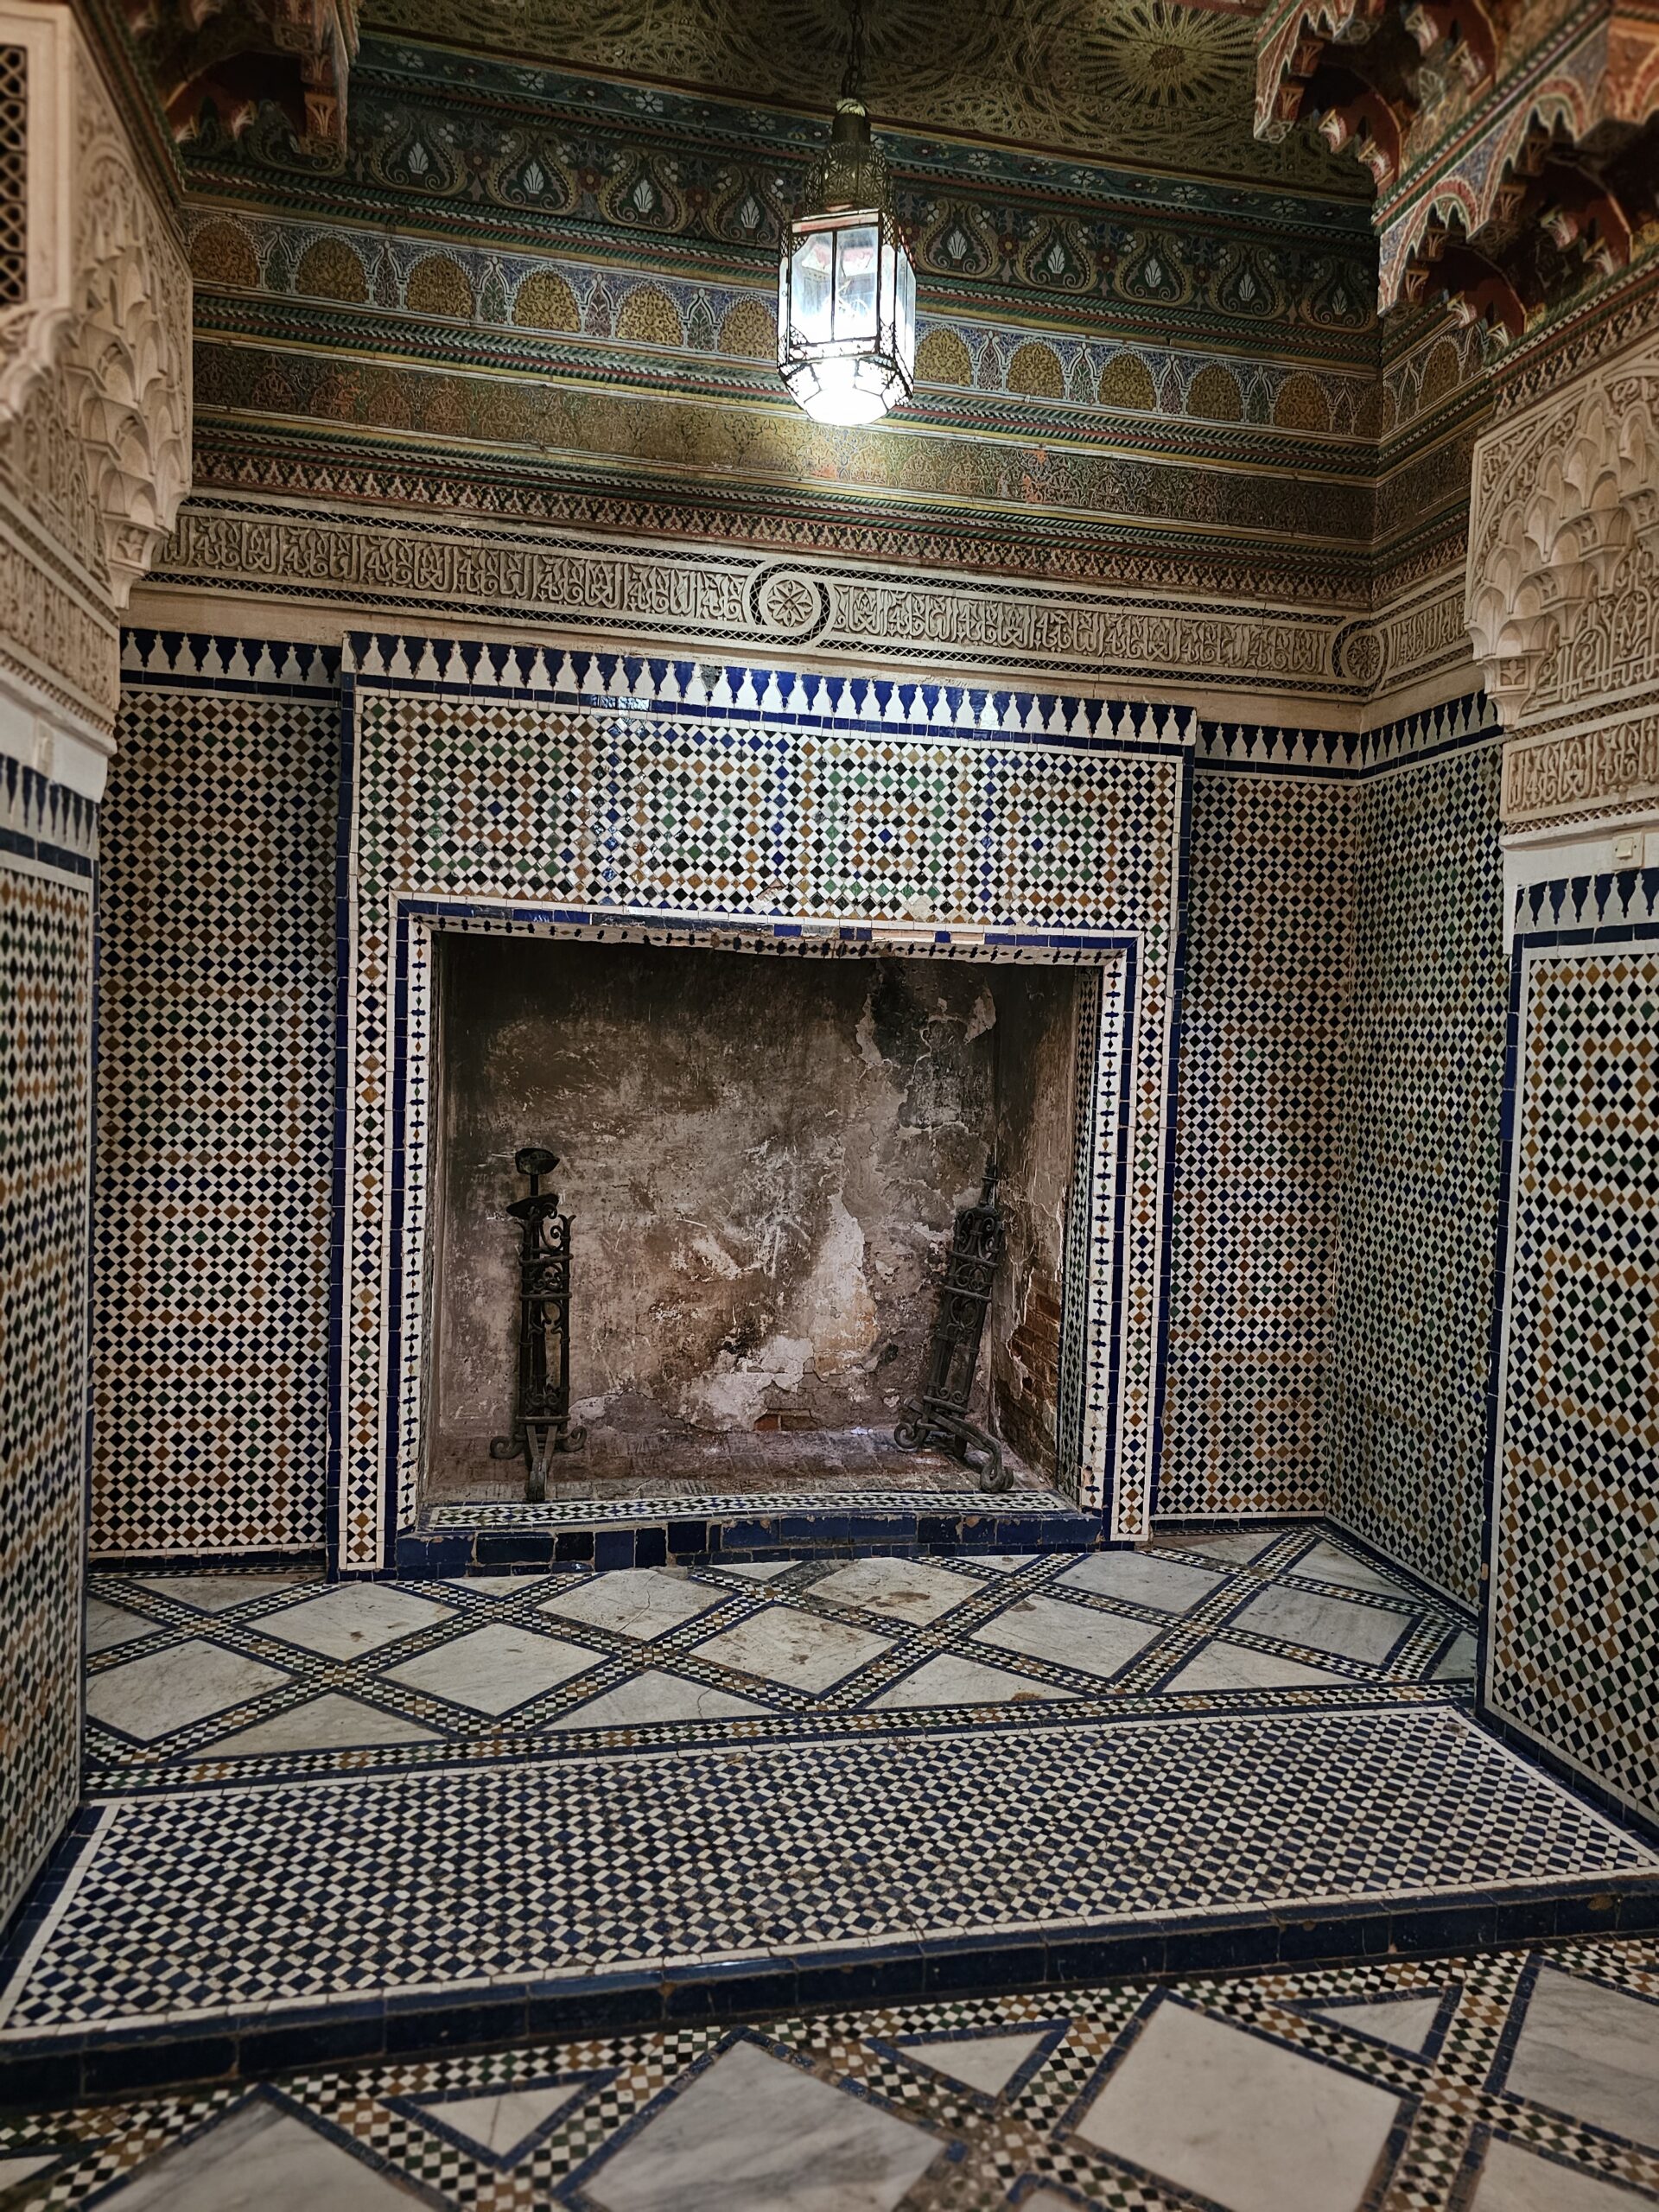 A giant fireplace at Bahia Palace with colourful tiles and mosaic around it. Image by 360onhistory.com